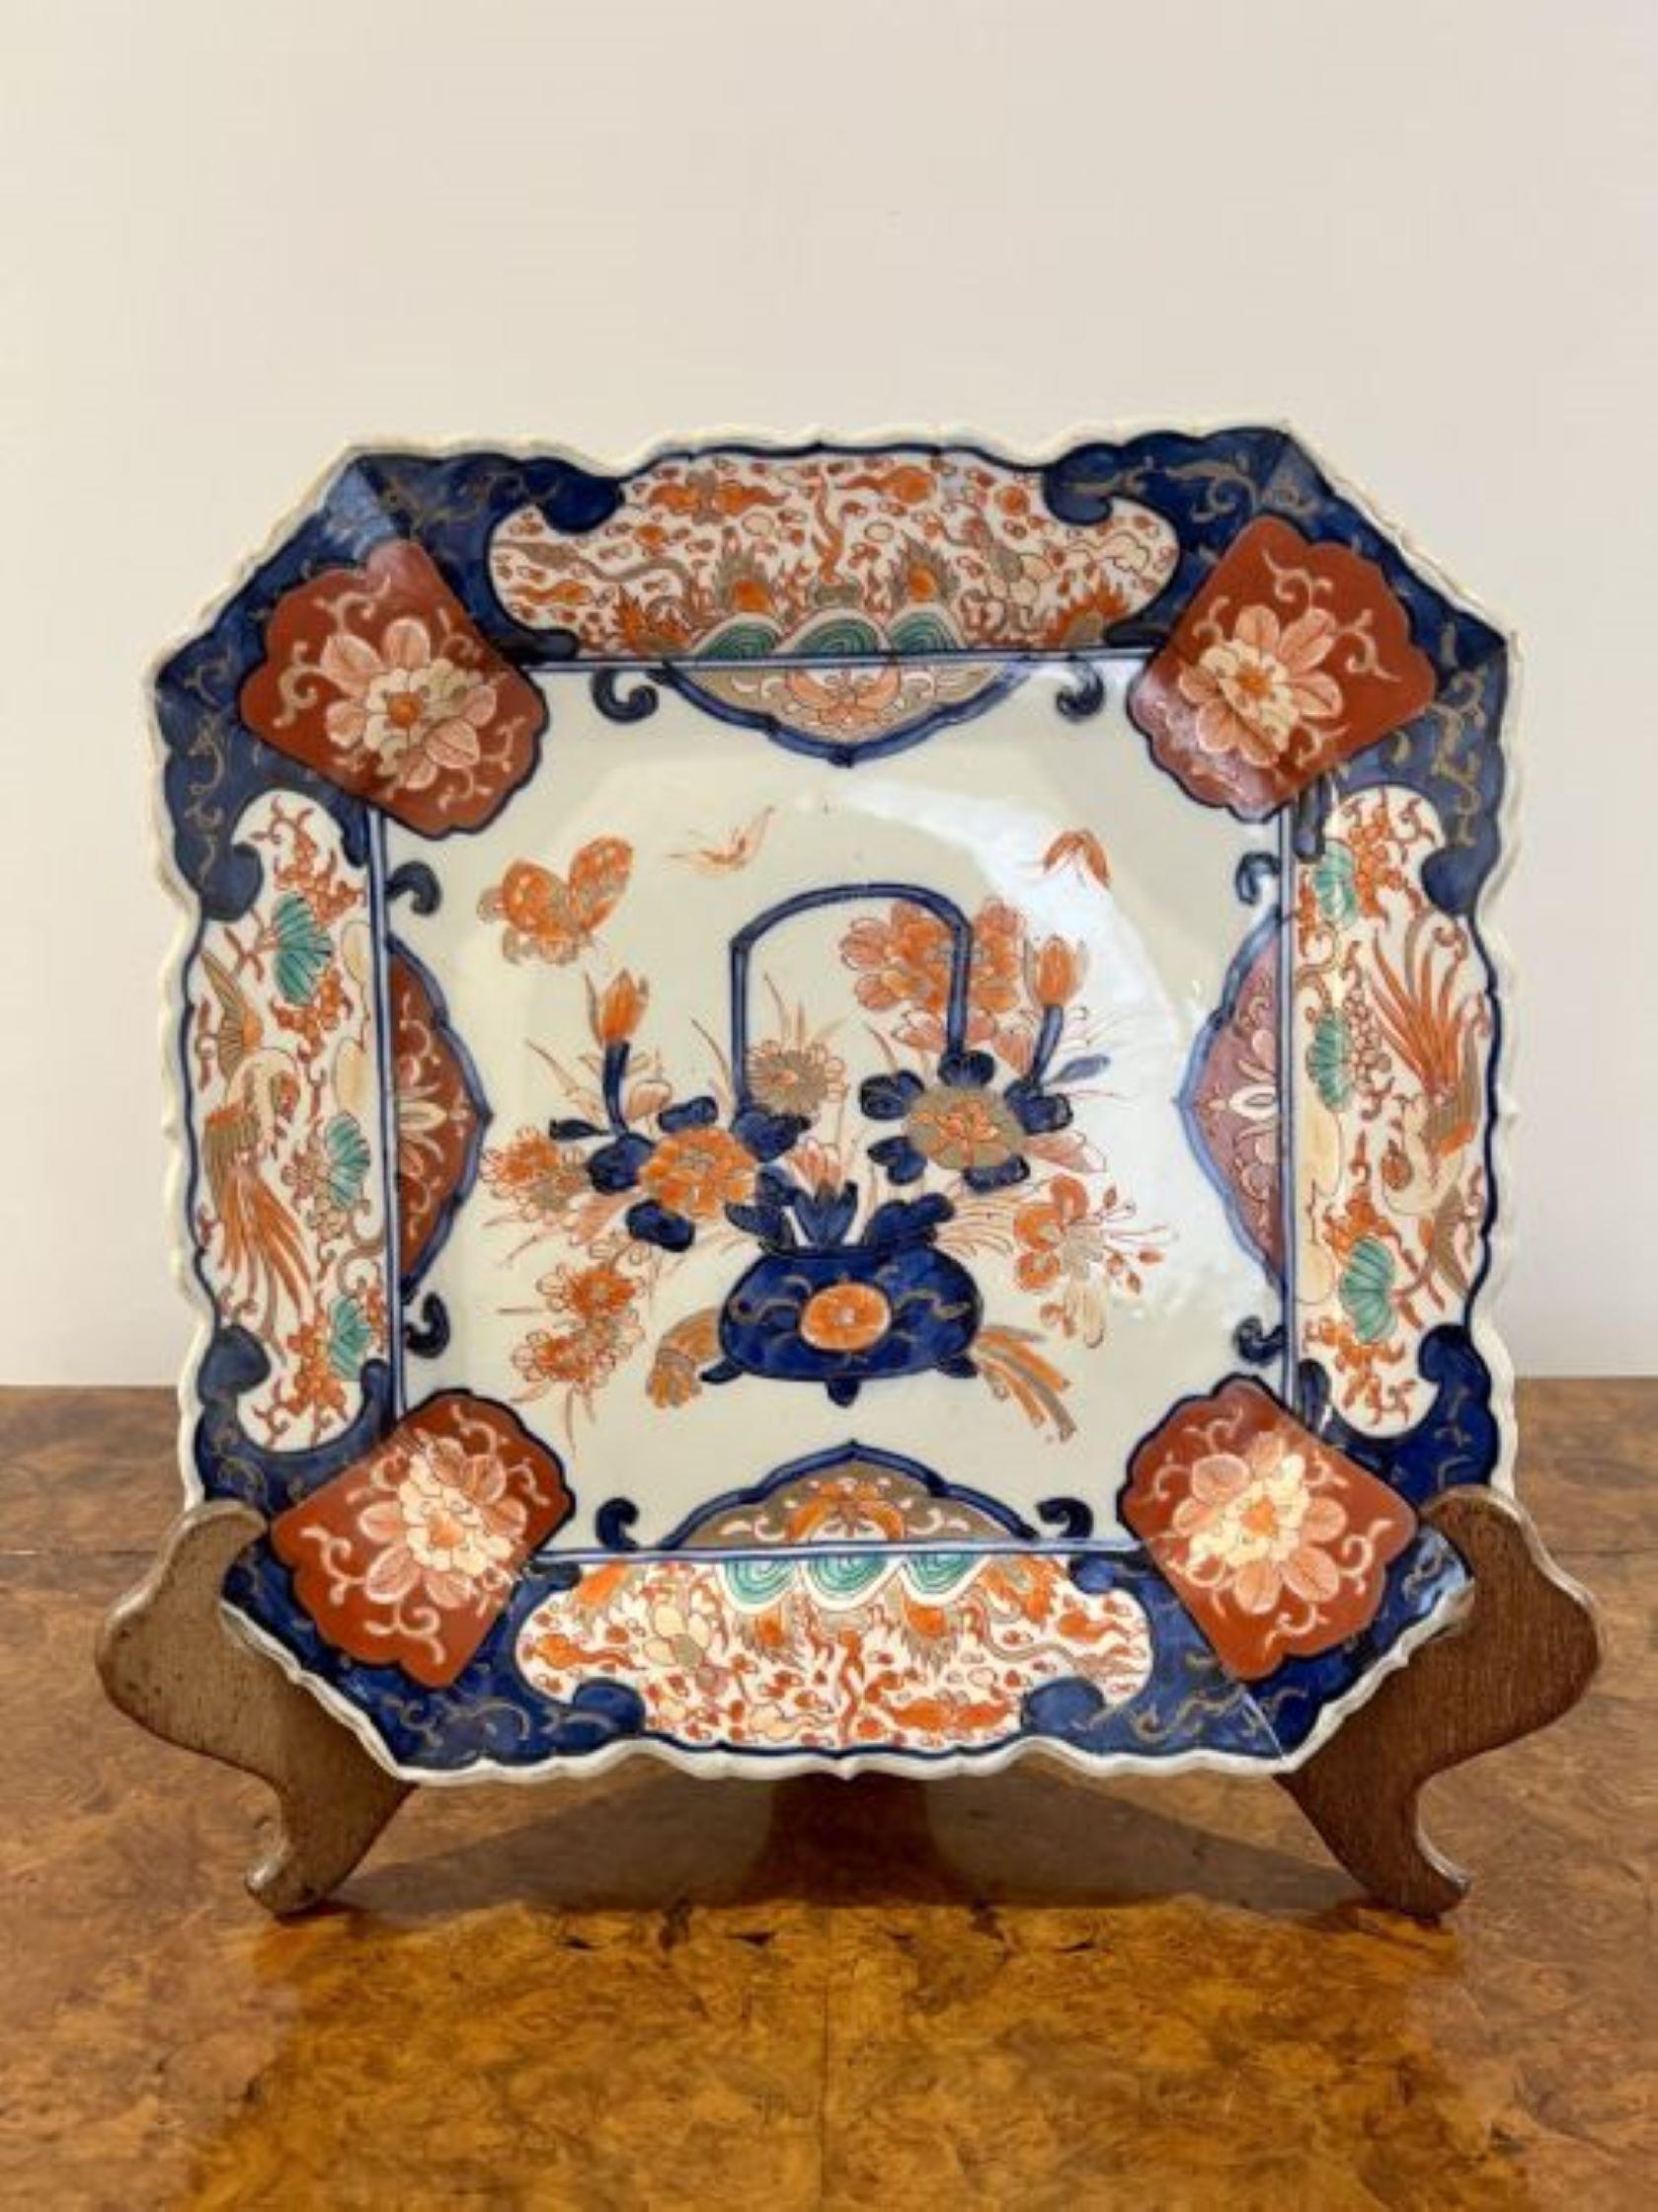 Fine Quality Antique Hand Painted Japanese Large Imari square Plate. Having a shaped scalloped edge with quality hand painted panels, with a vase of flowers and leaves to the centre, in wonderful Red, Blue, Gold, Orange and White colours.